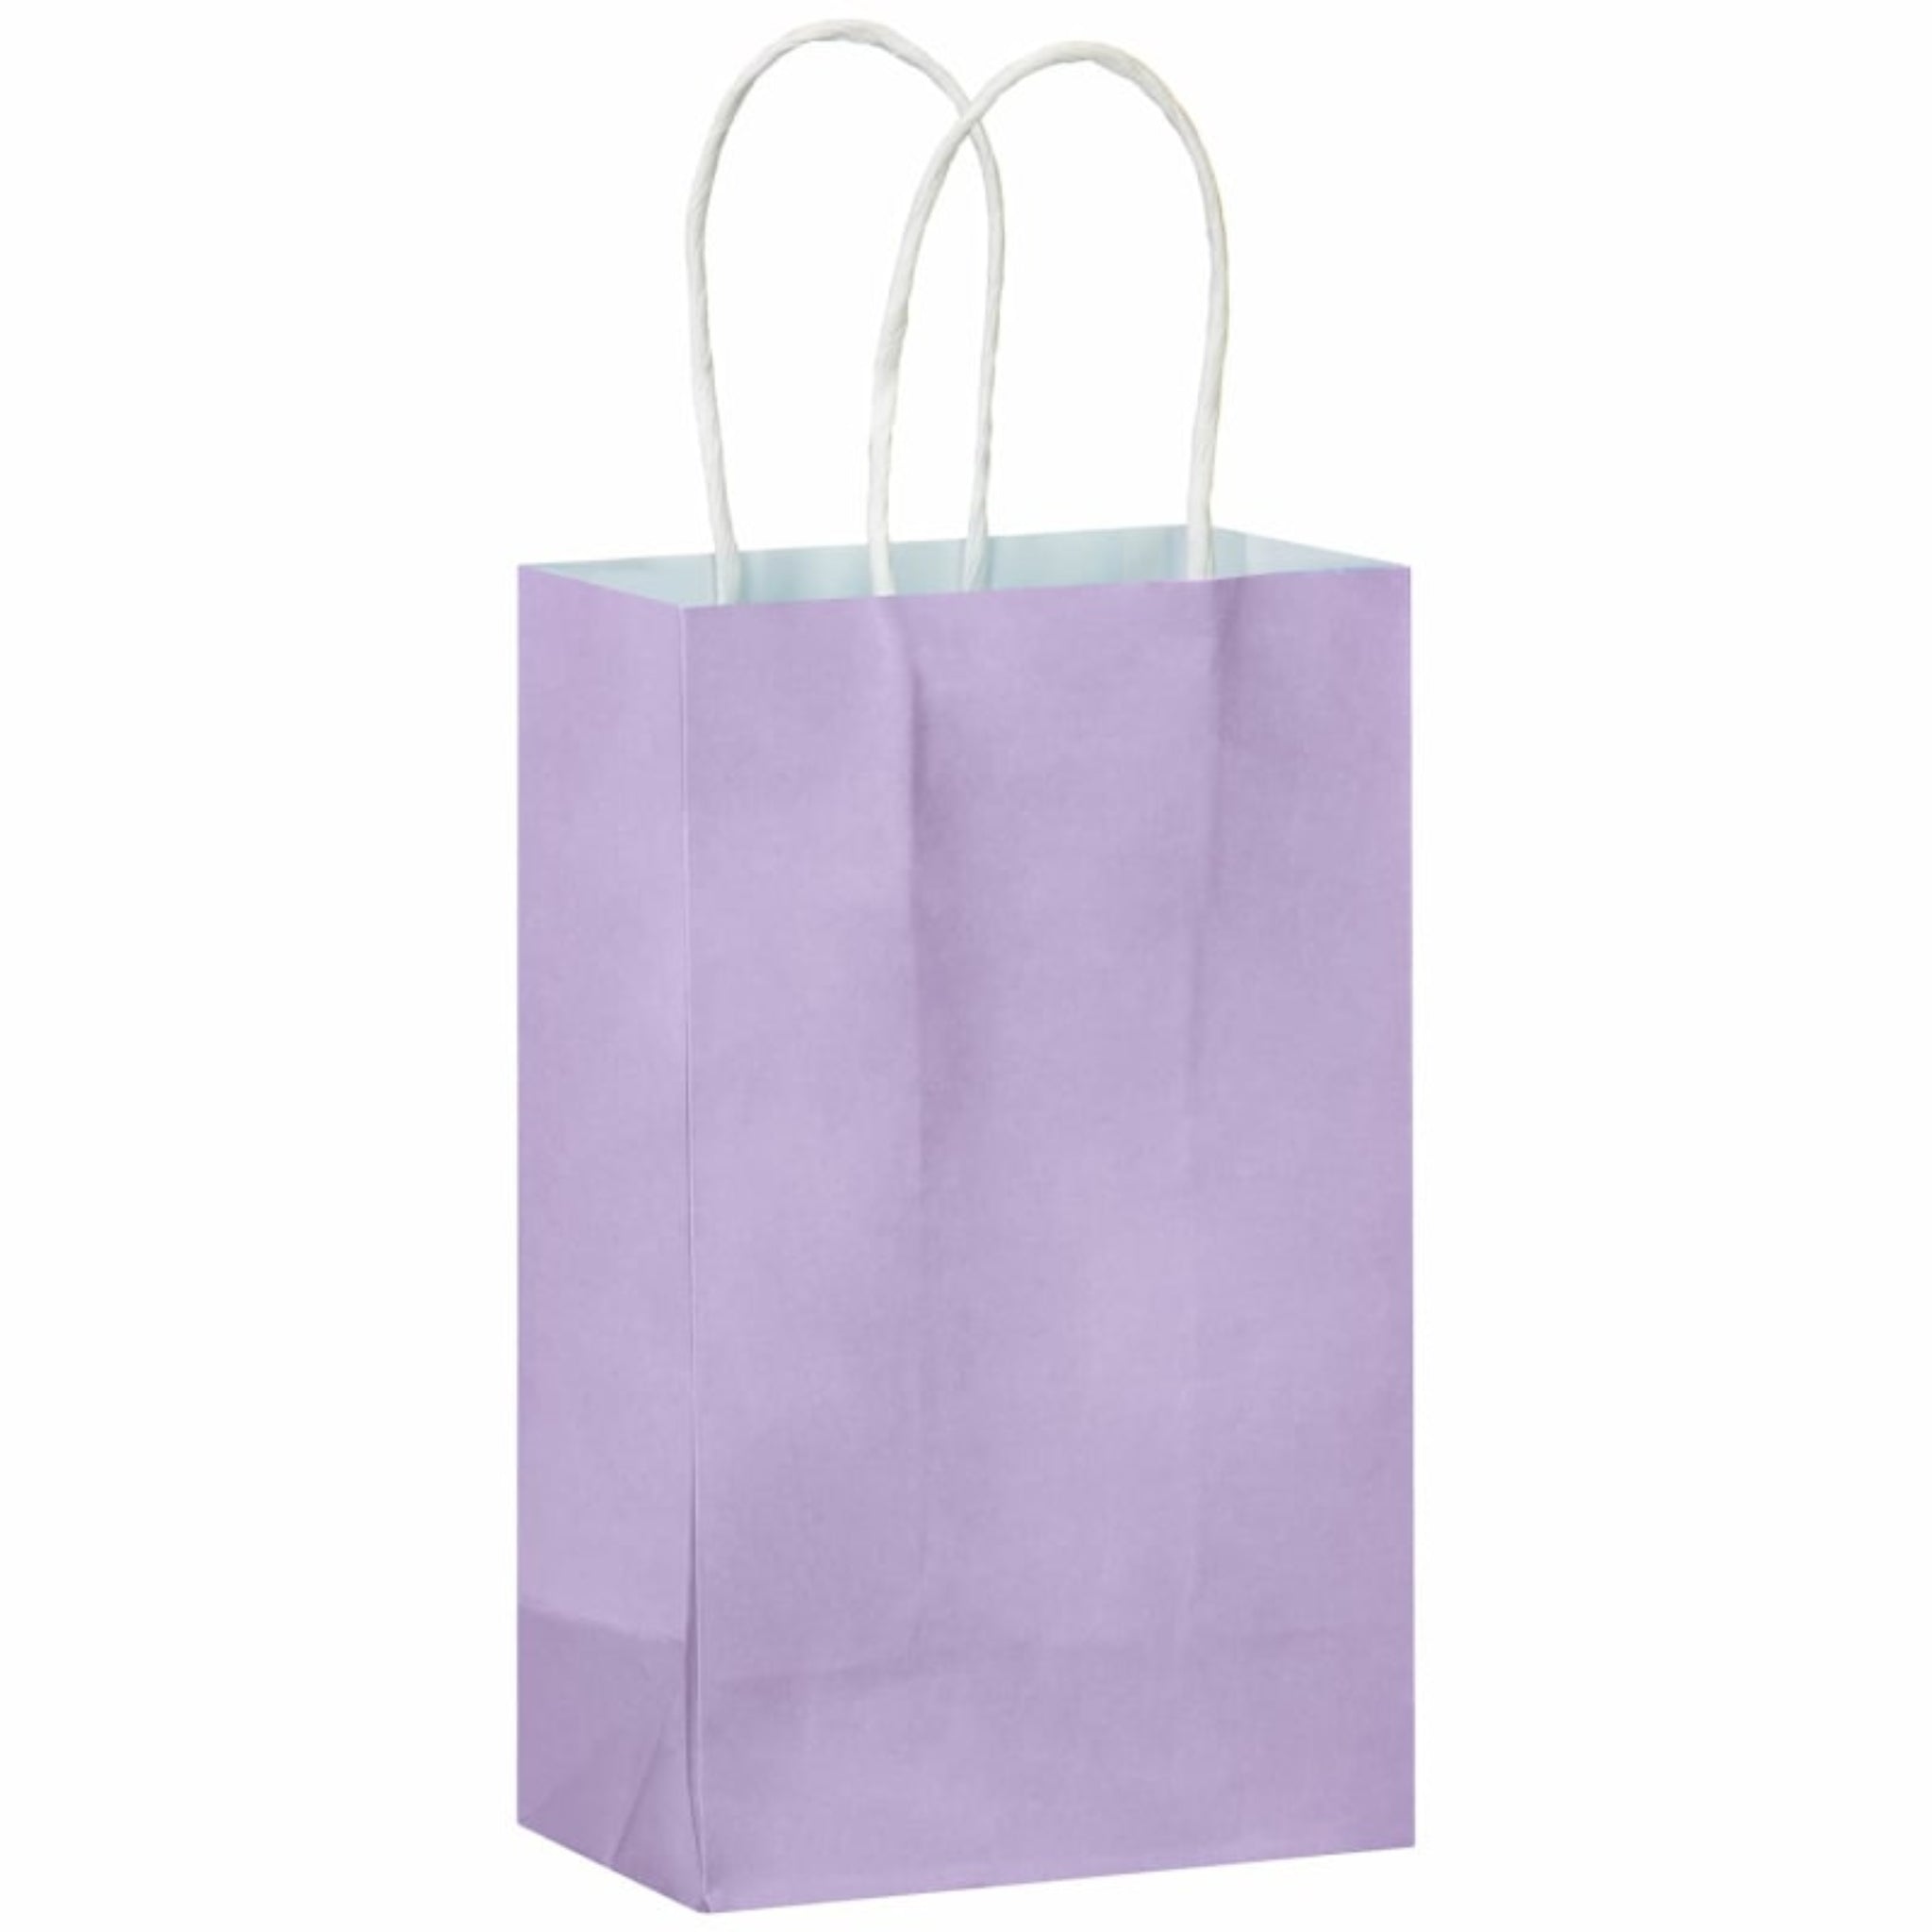 Lilac Party Bag